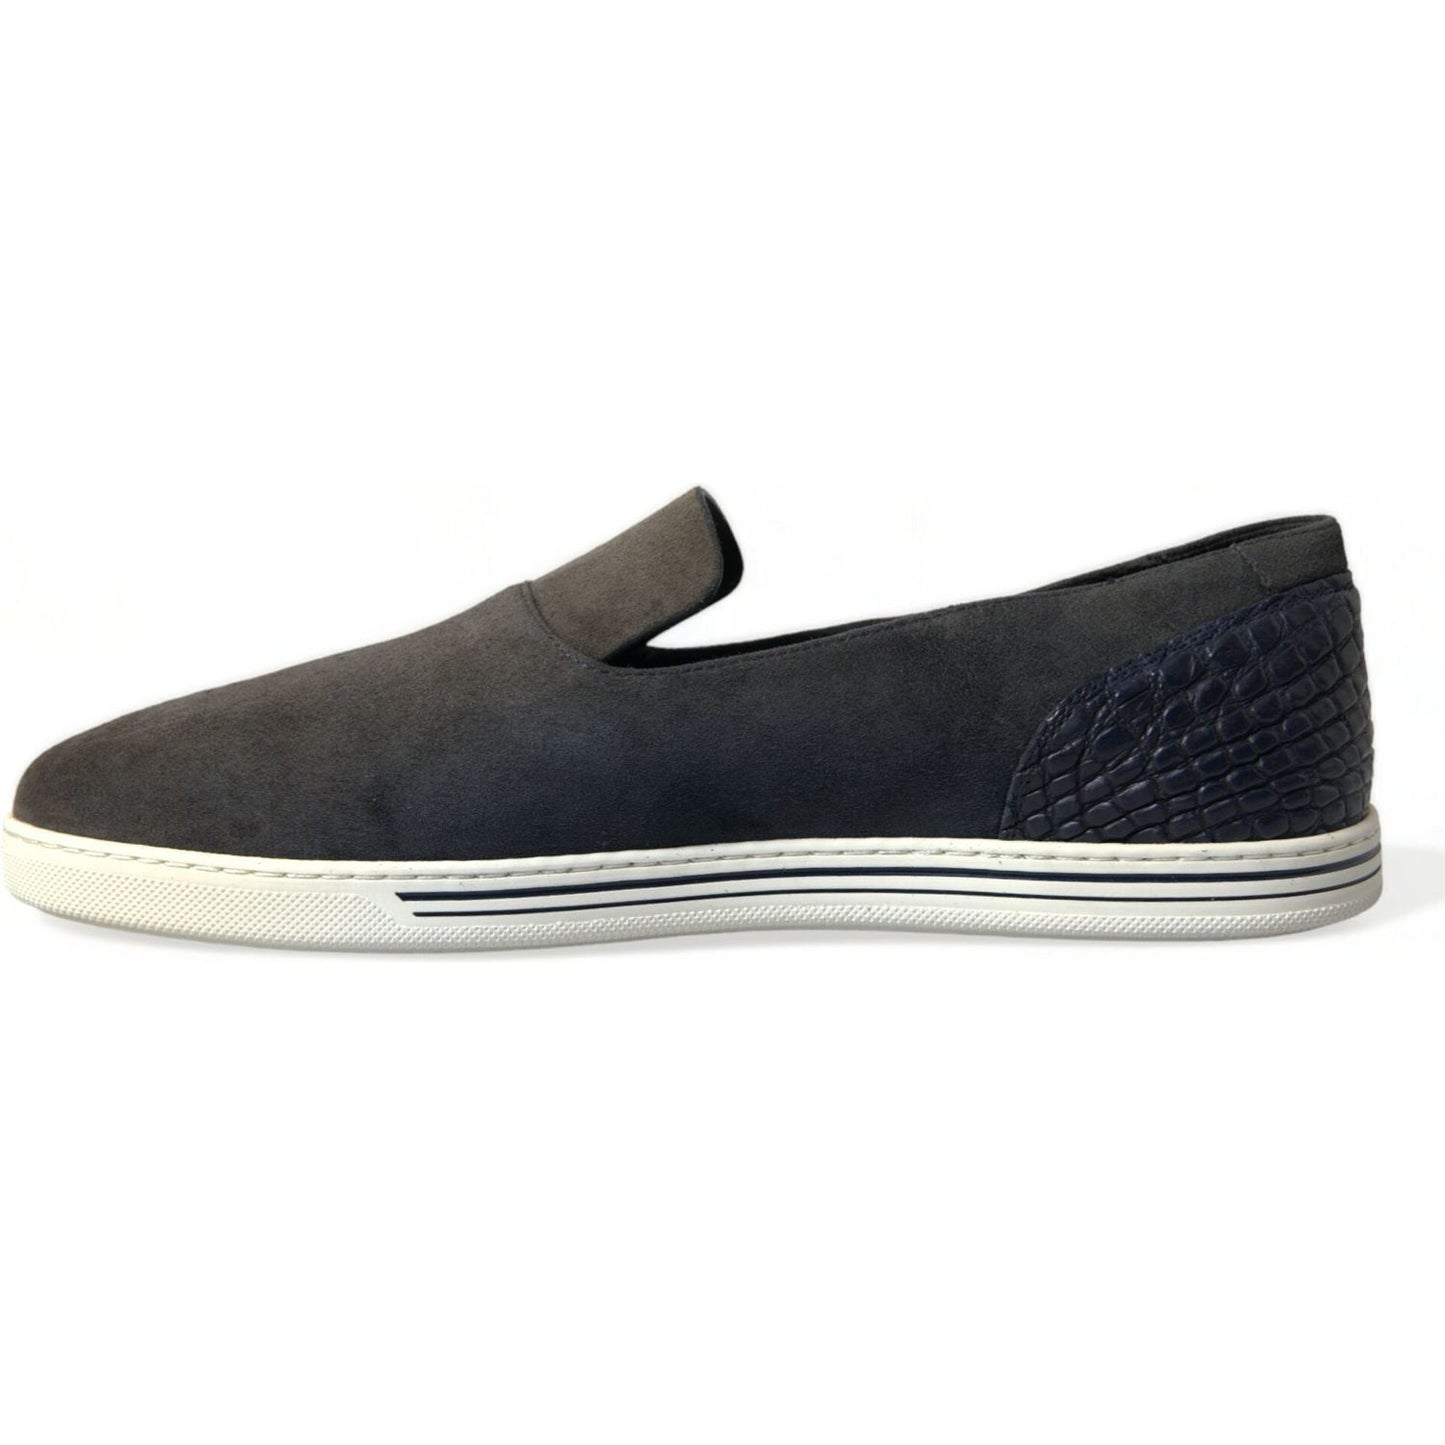 Dolce & Gabbana Elegant Blue Suede & Crocodile Slippers blue-suede-caiman-men-loafers-slippers-shoes